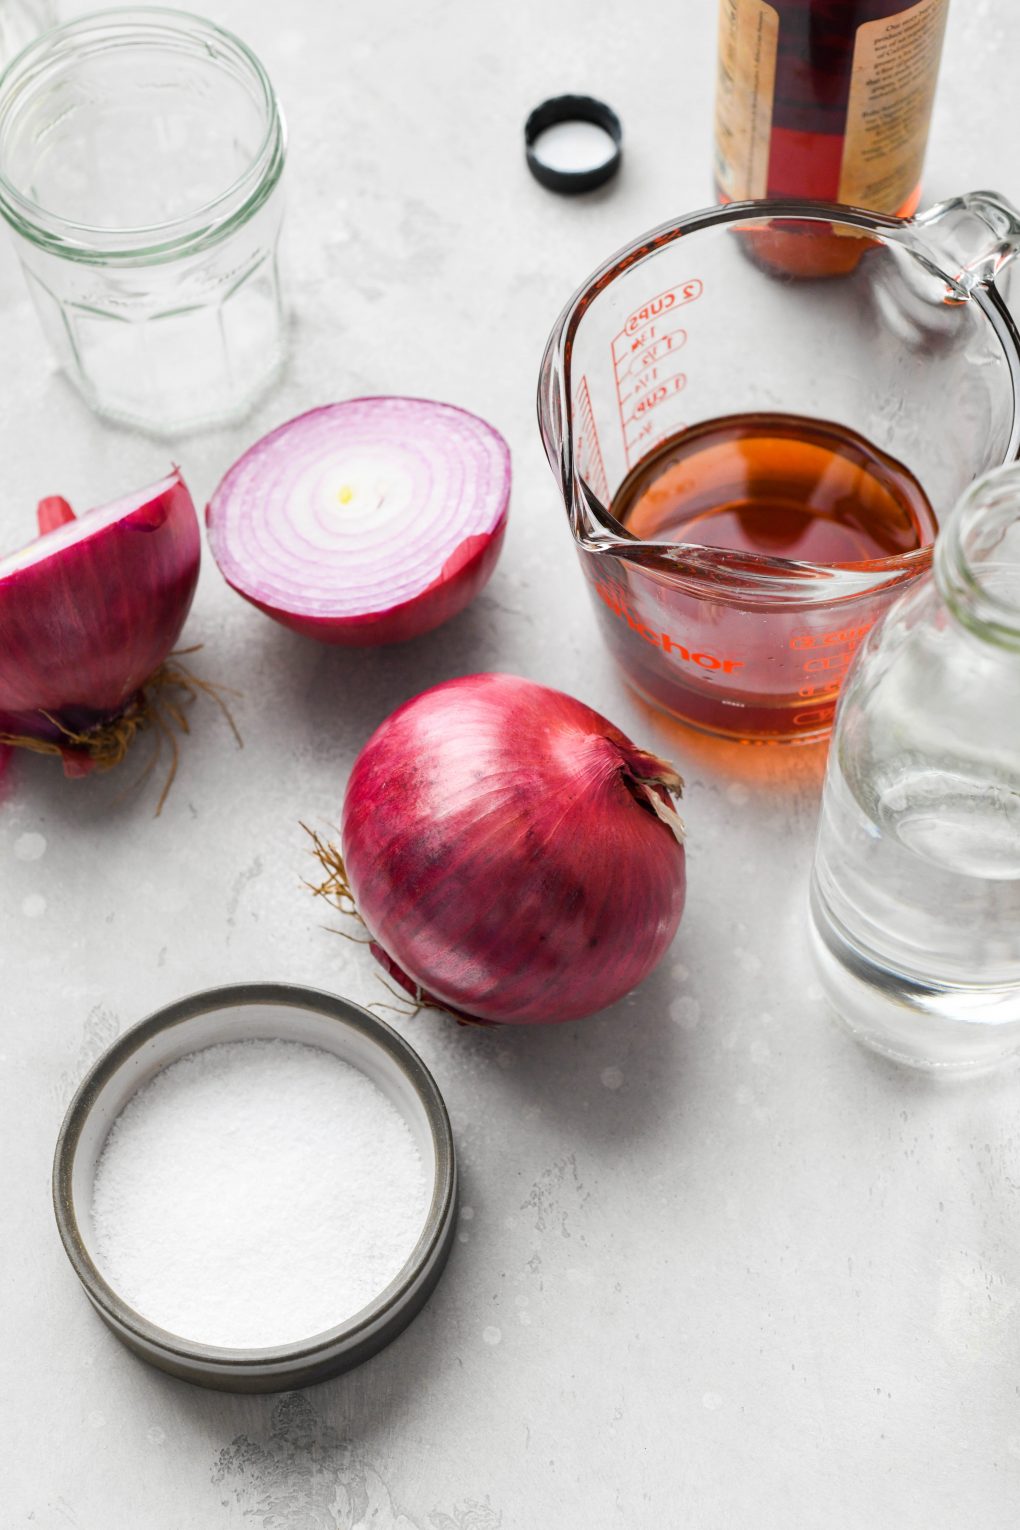 Overhead shot of ingredients for quick pickled red onions - a large red onion next to another large red onion cut in half, a measuring cup with red wine vinegar, a small dish of kosher salt, and a jar of water.